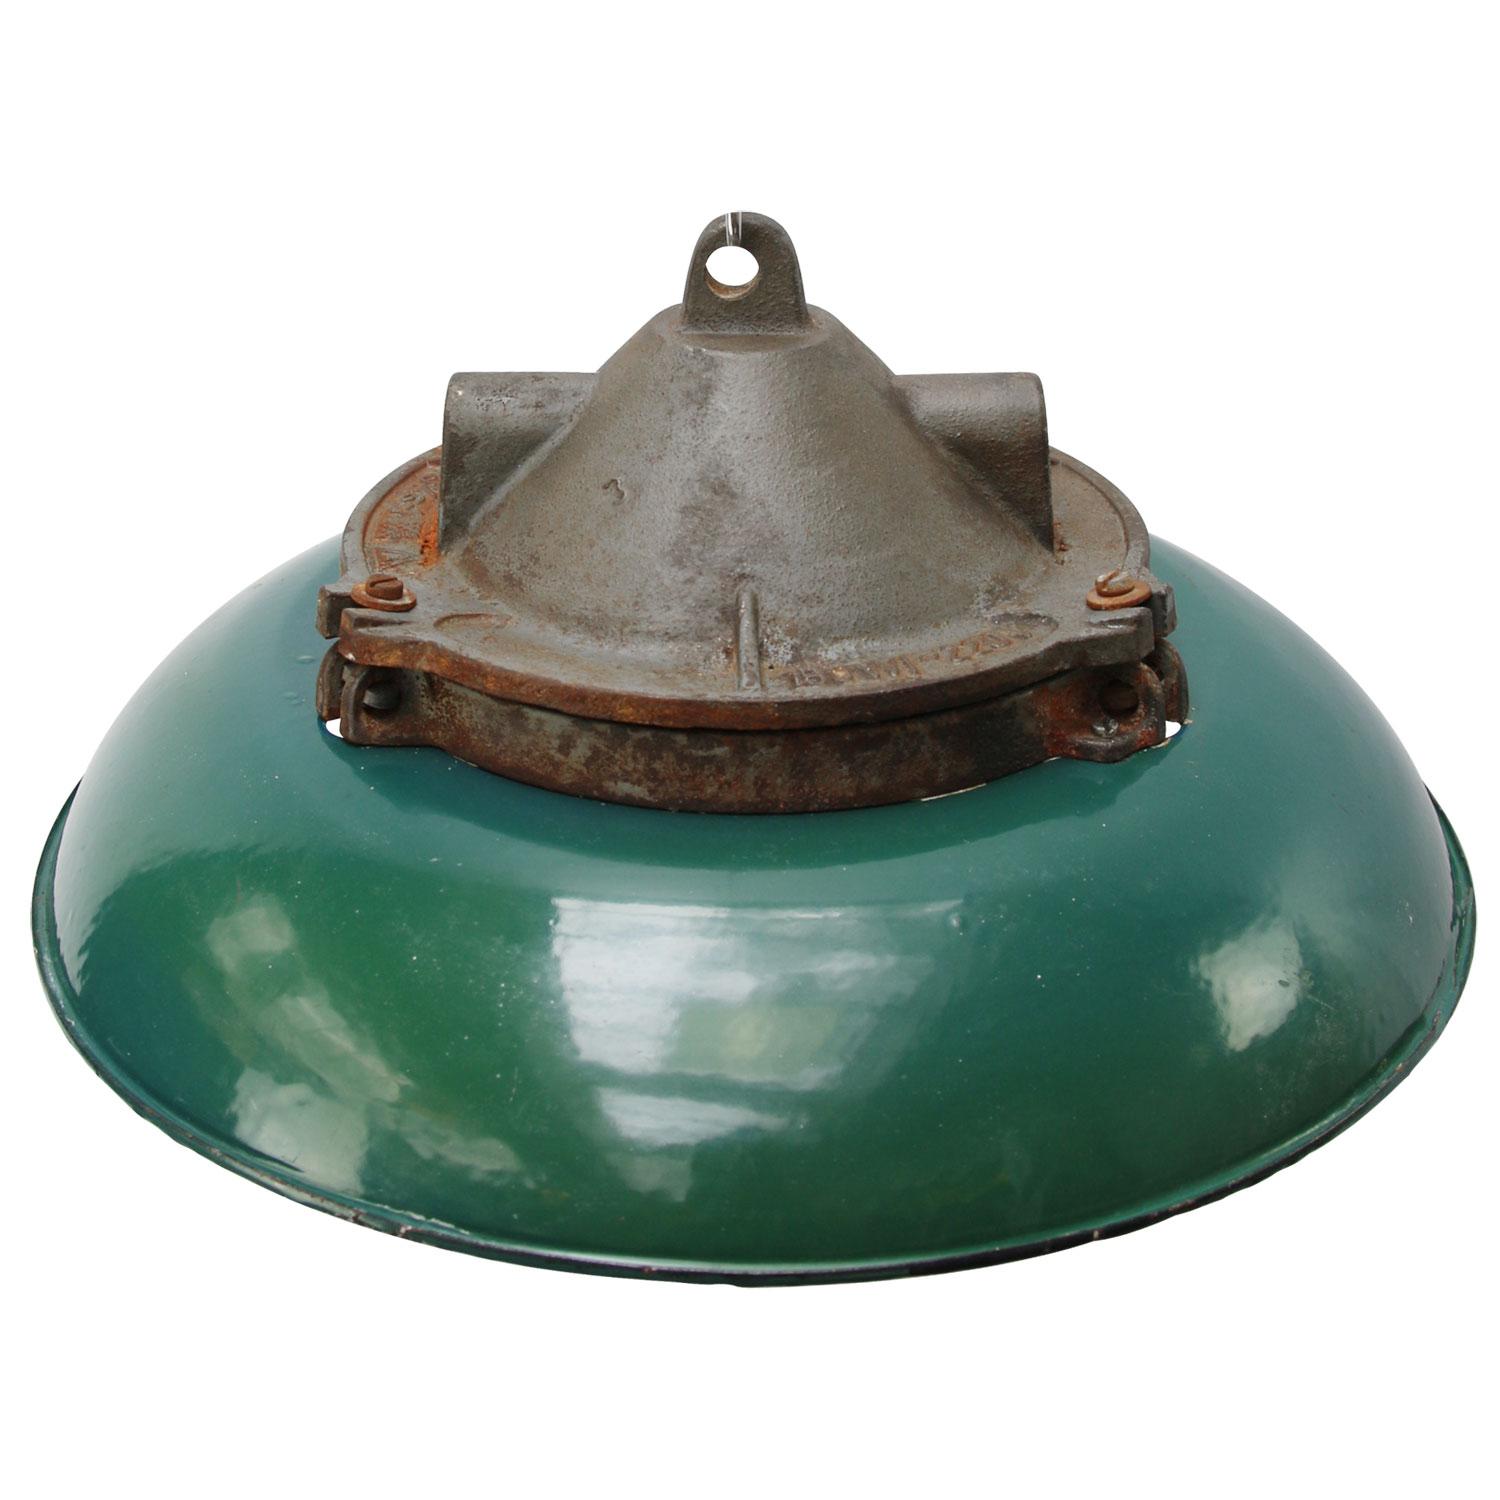 Factory pendant, petrol enamel white interior,
cast iron top, Holophane glass

Weight 6.0 kg / 13.2 lb

Priced per individual item. All lamps have been made suitable by international standards for incandescent light bulbs, energy-efficient and